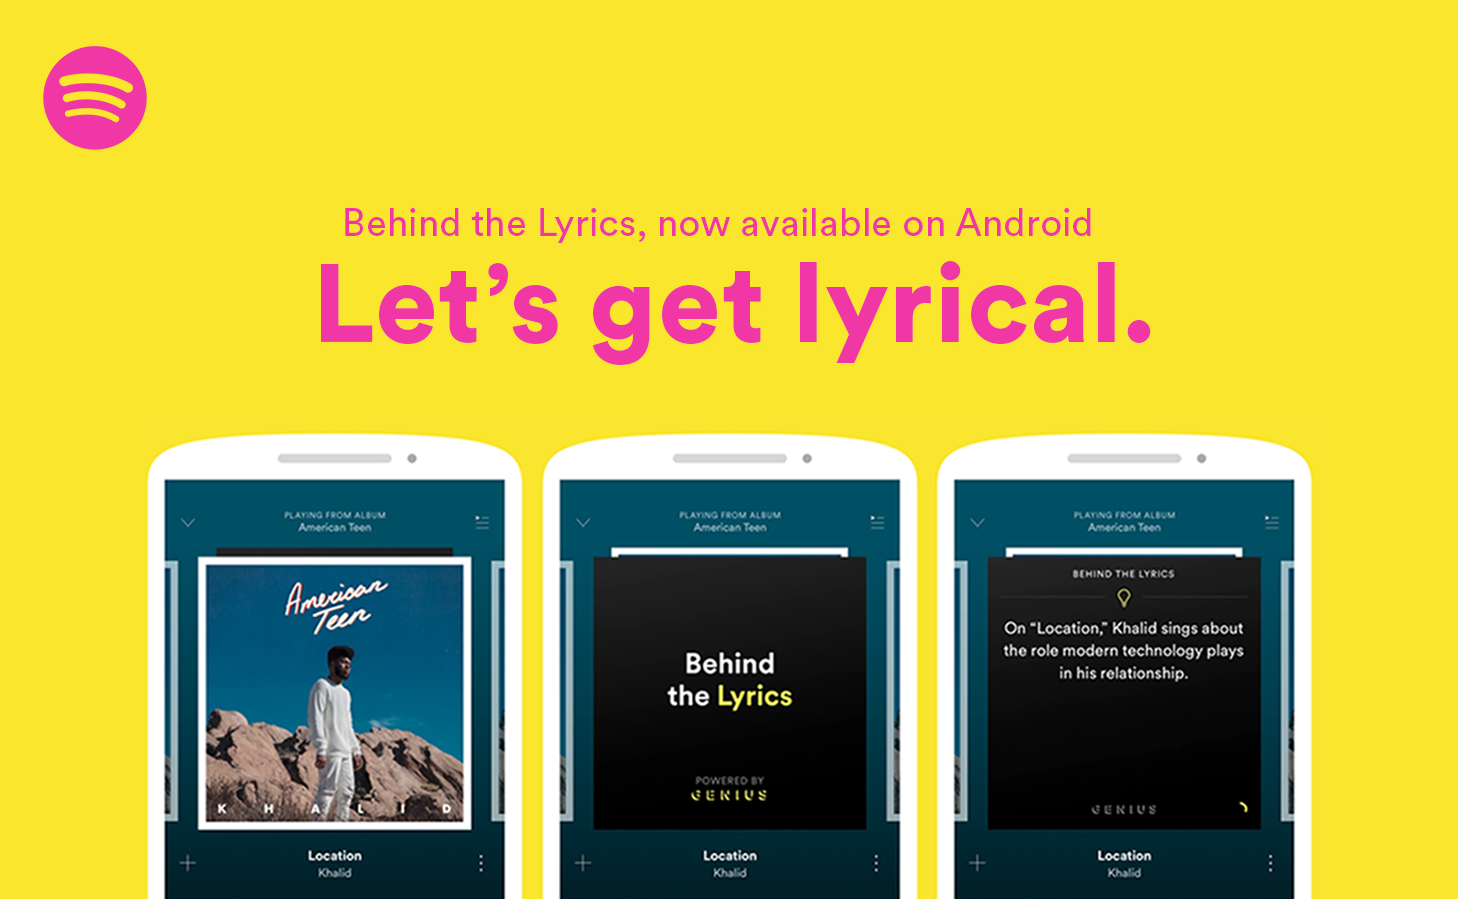 Learn all about the creation of some of your favorite songs as Behind the Lyrics is added to the Android variant of the Spotify app - Spotify updates its Android app to include "Behind the Lyrics"